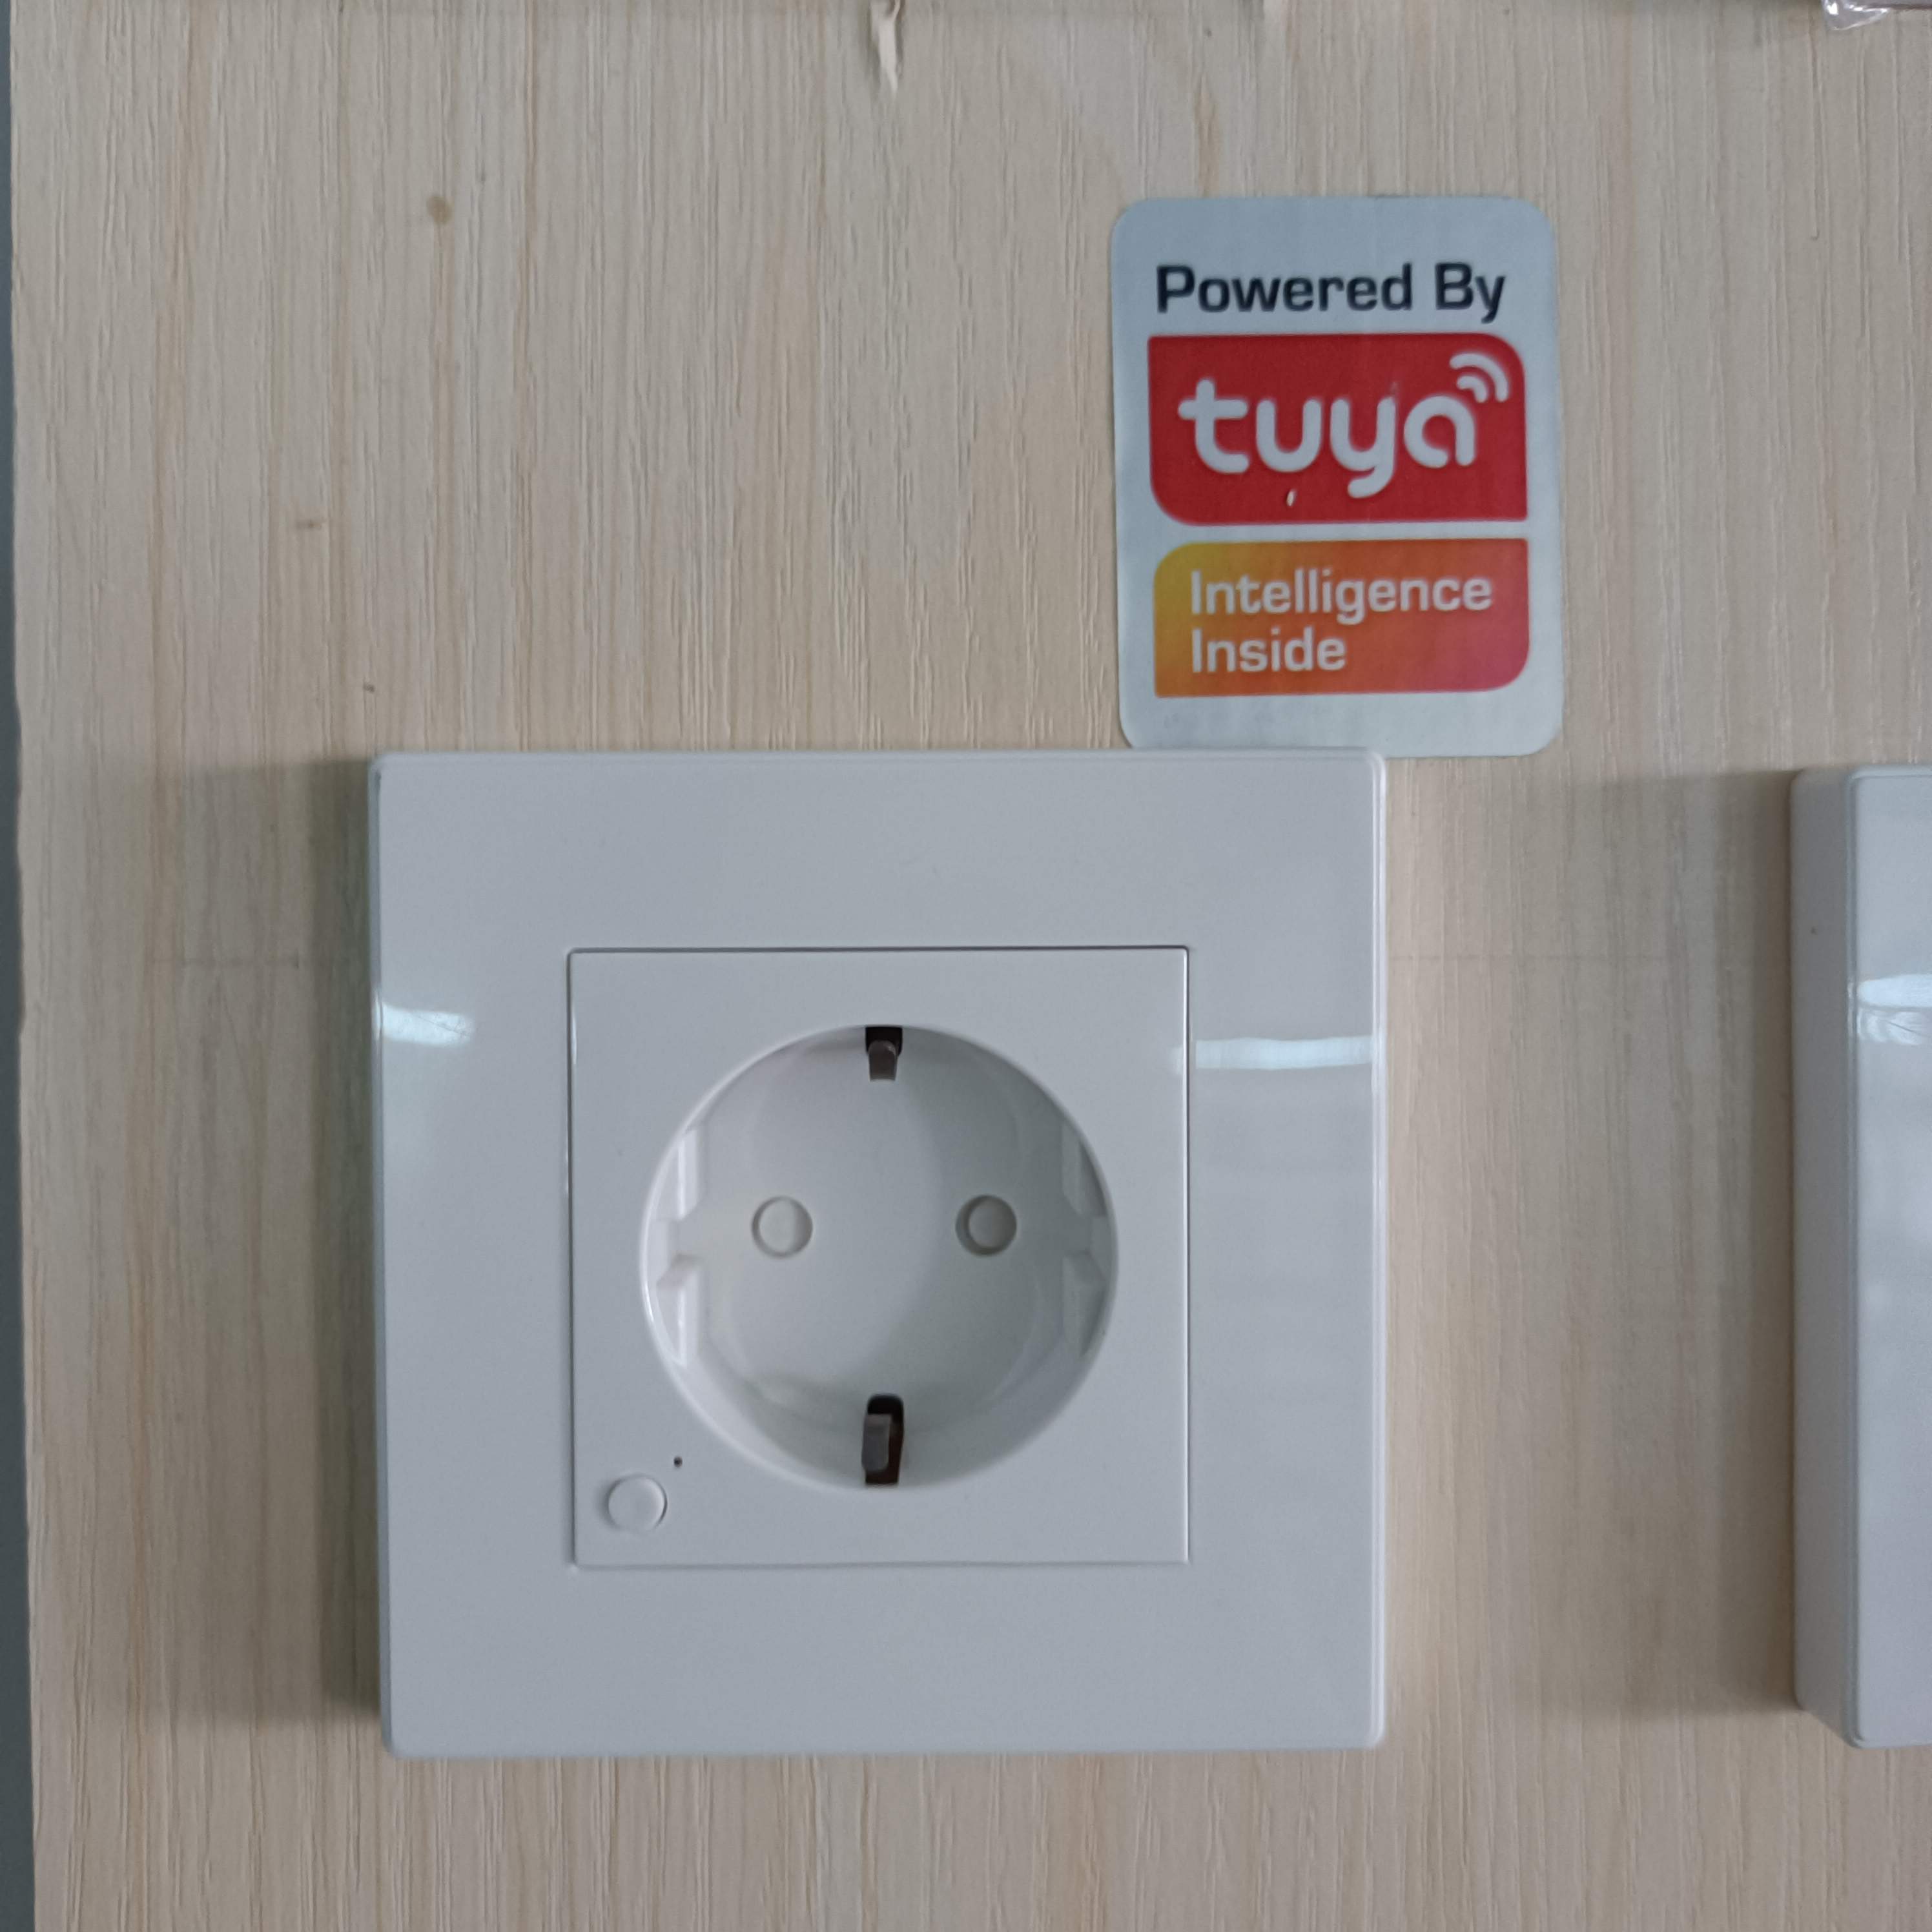 https://www.simatoper.com/tuya-wifi-smart-in-wall-socket-with-power-meterpc-or-tempered-glass-frame-eu-plug-product/